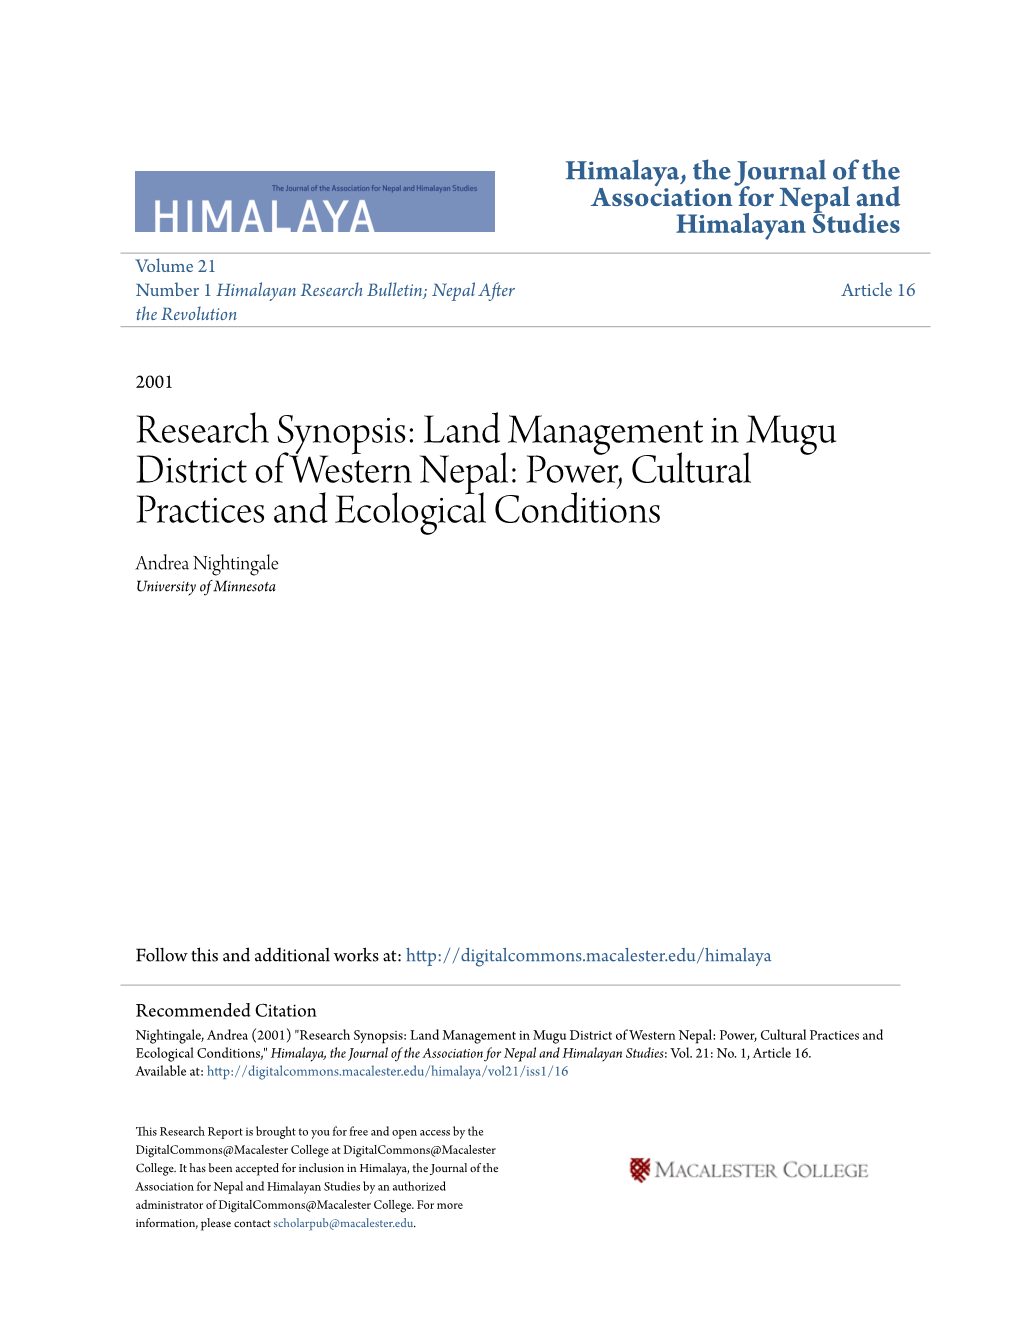 Land Management in Mugu District of Western Nepal: Power, Cultural Practices and Ecological Conditions Andrea Nightingale University of Minnesota